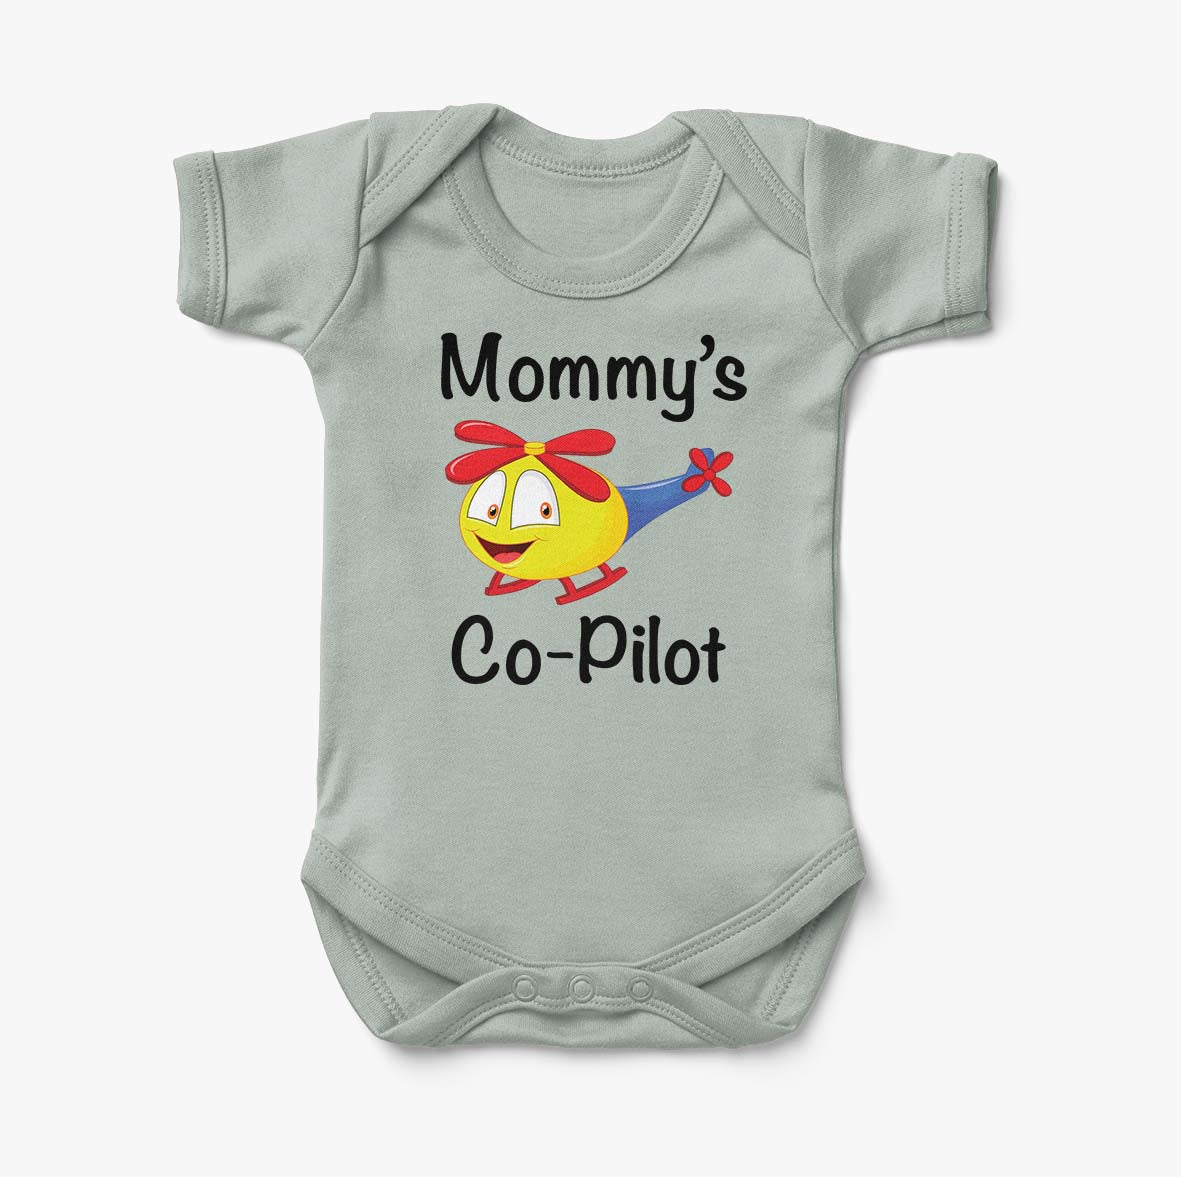 Mommy's Co-Pilot (Helicopter) Designed Baby Bodysuits